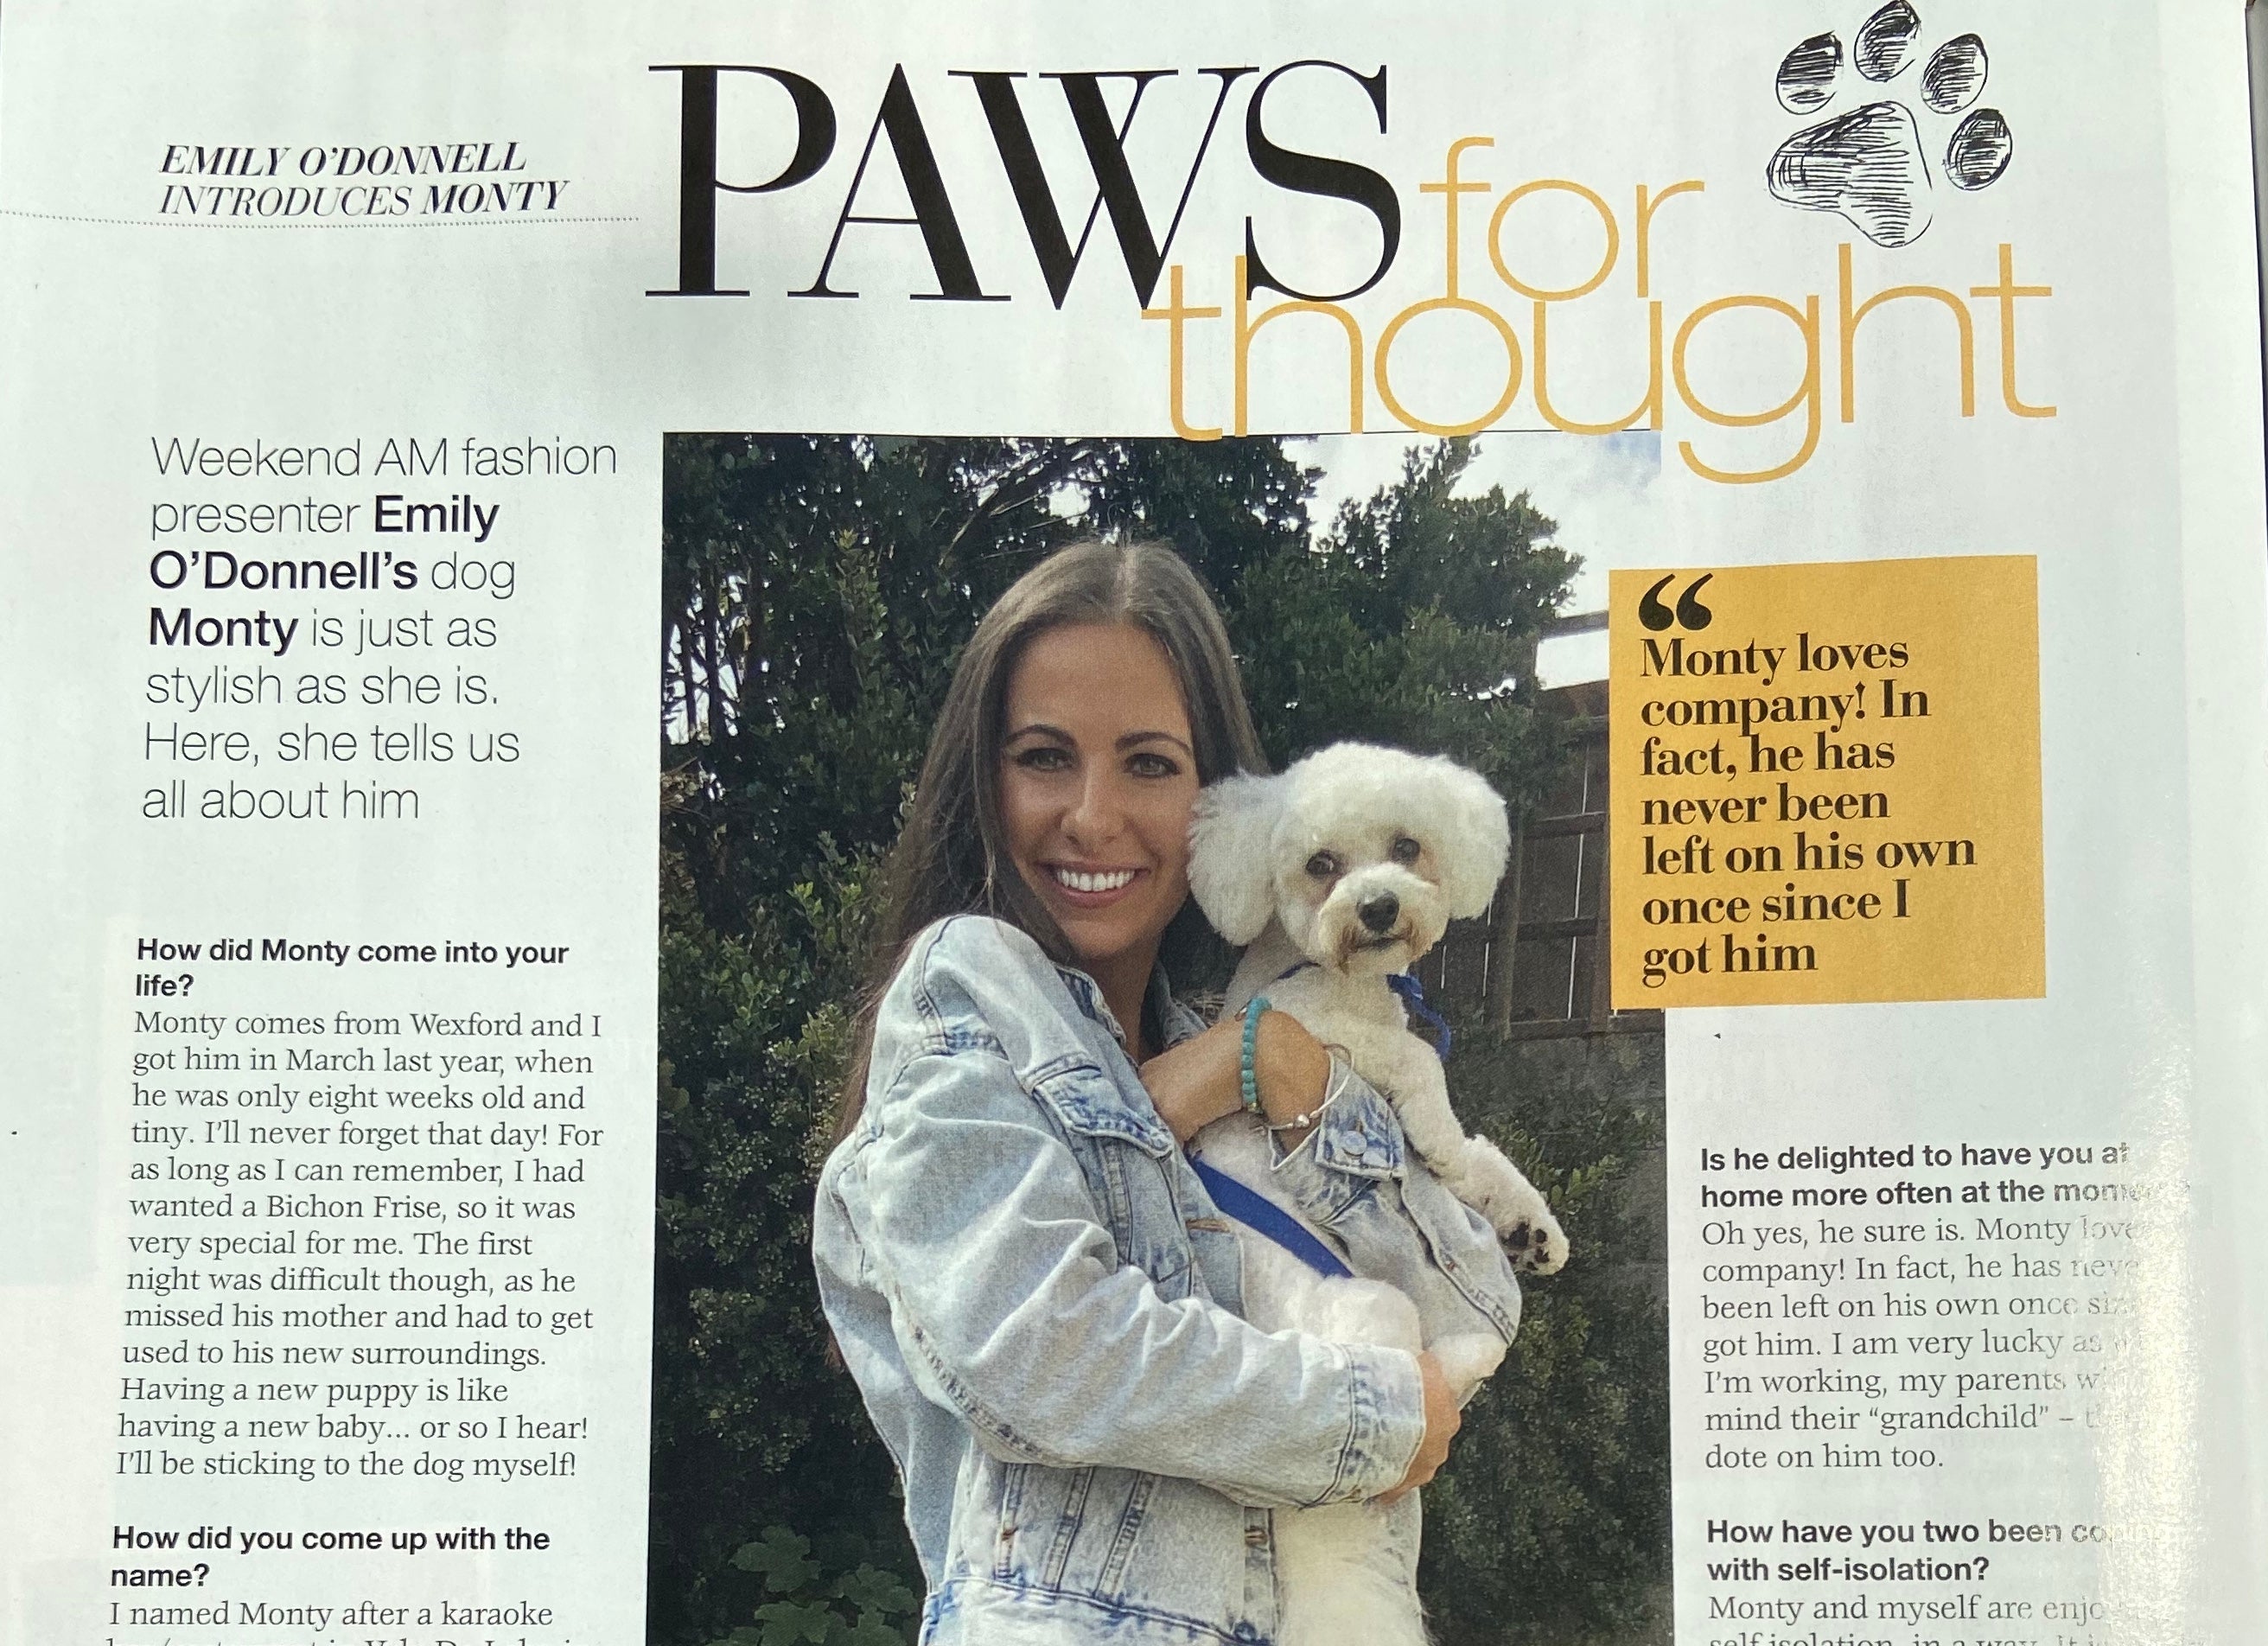 7th Heaven Jewellery in RSVP Magazine with Monty the dog